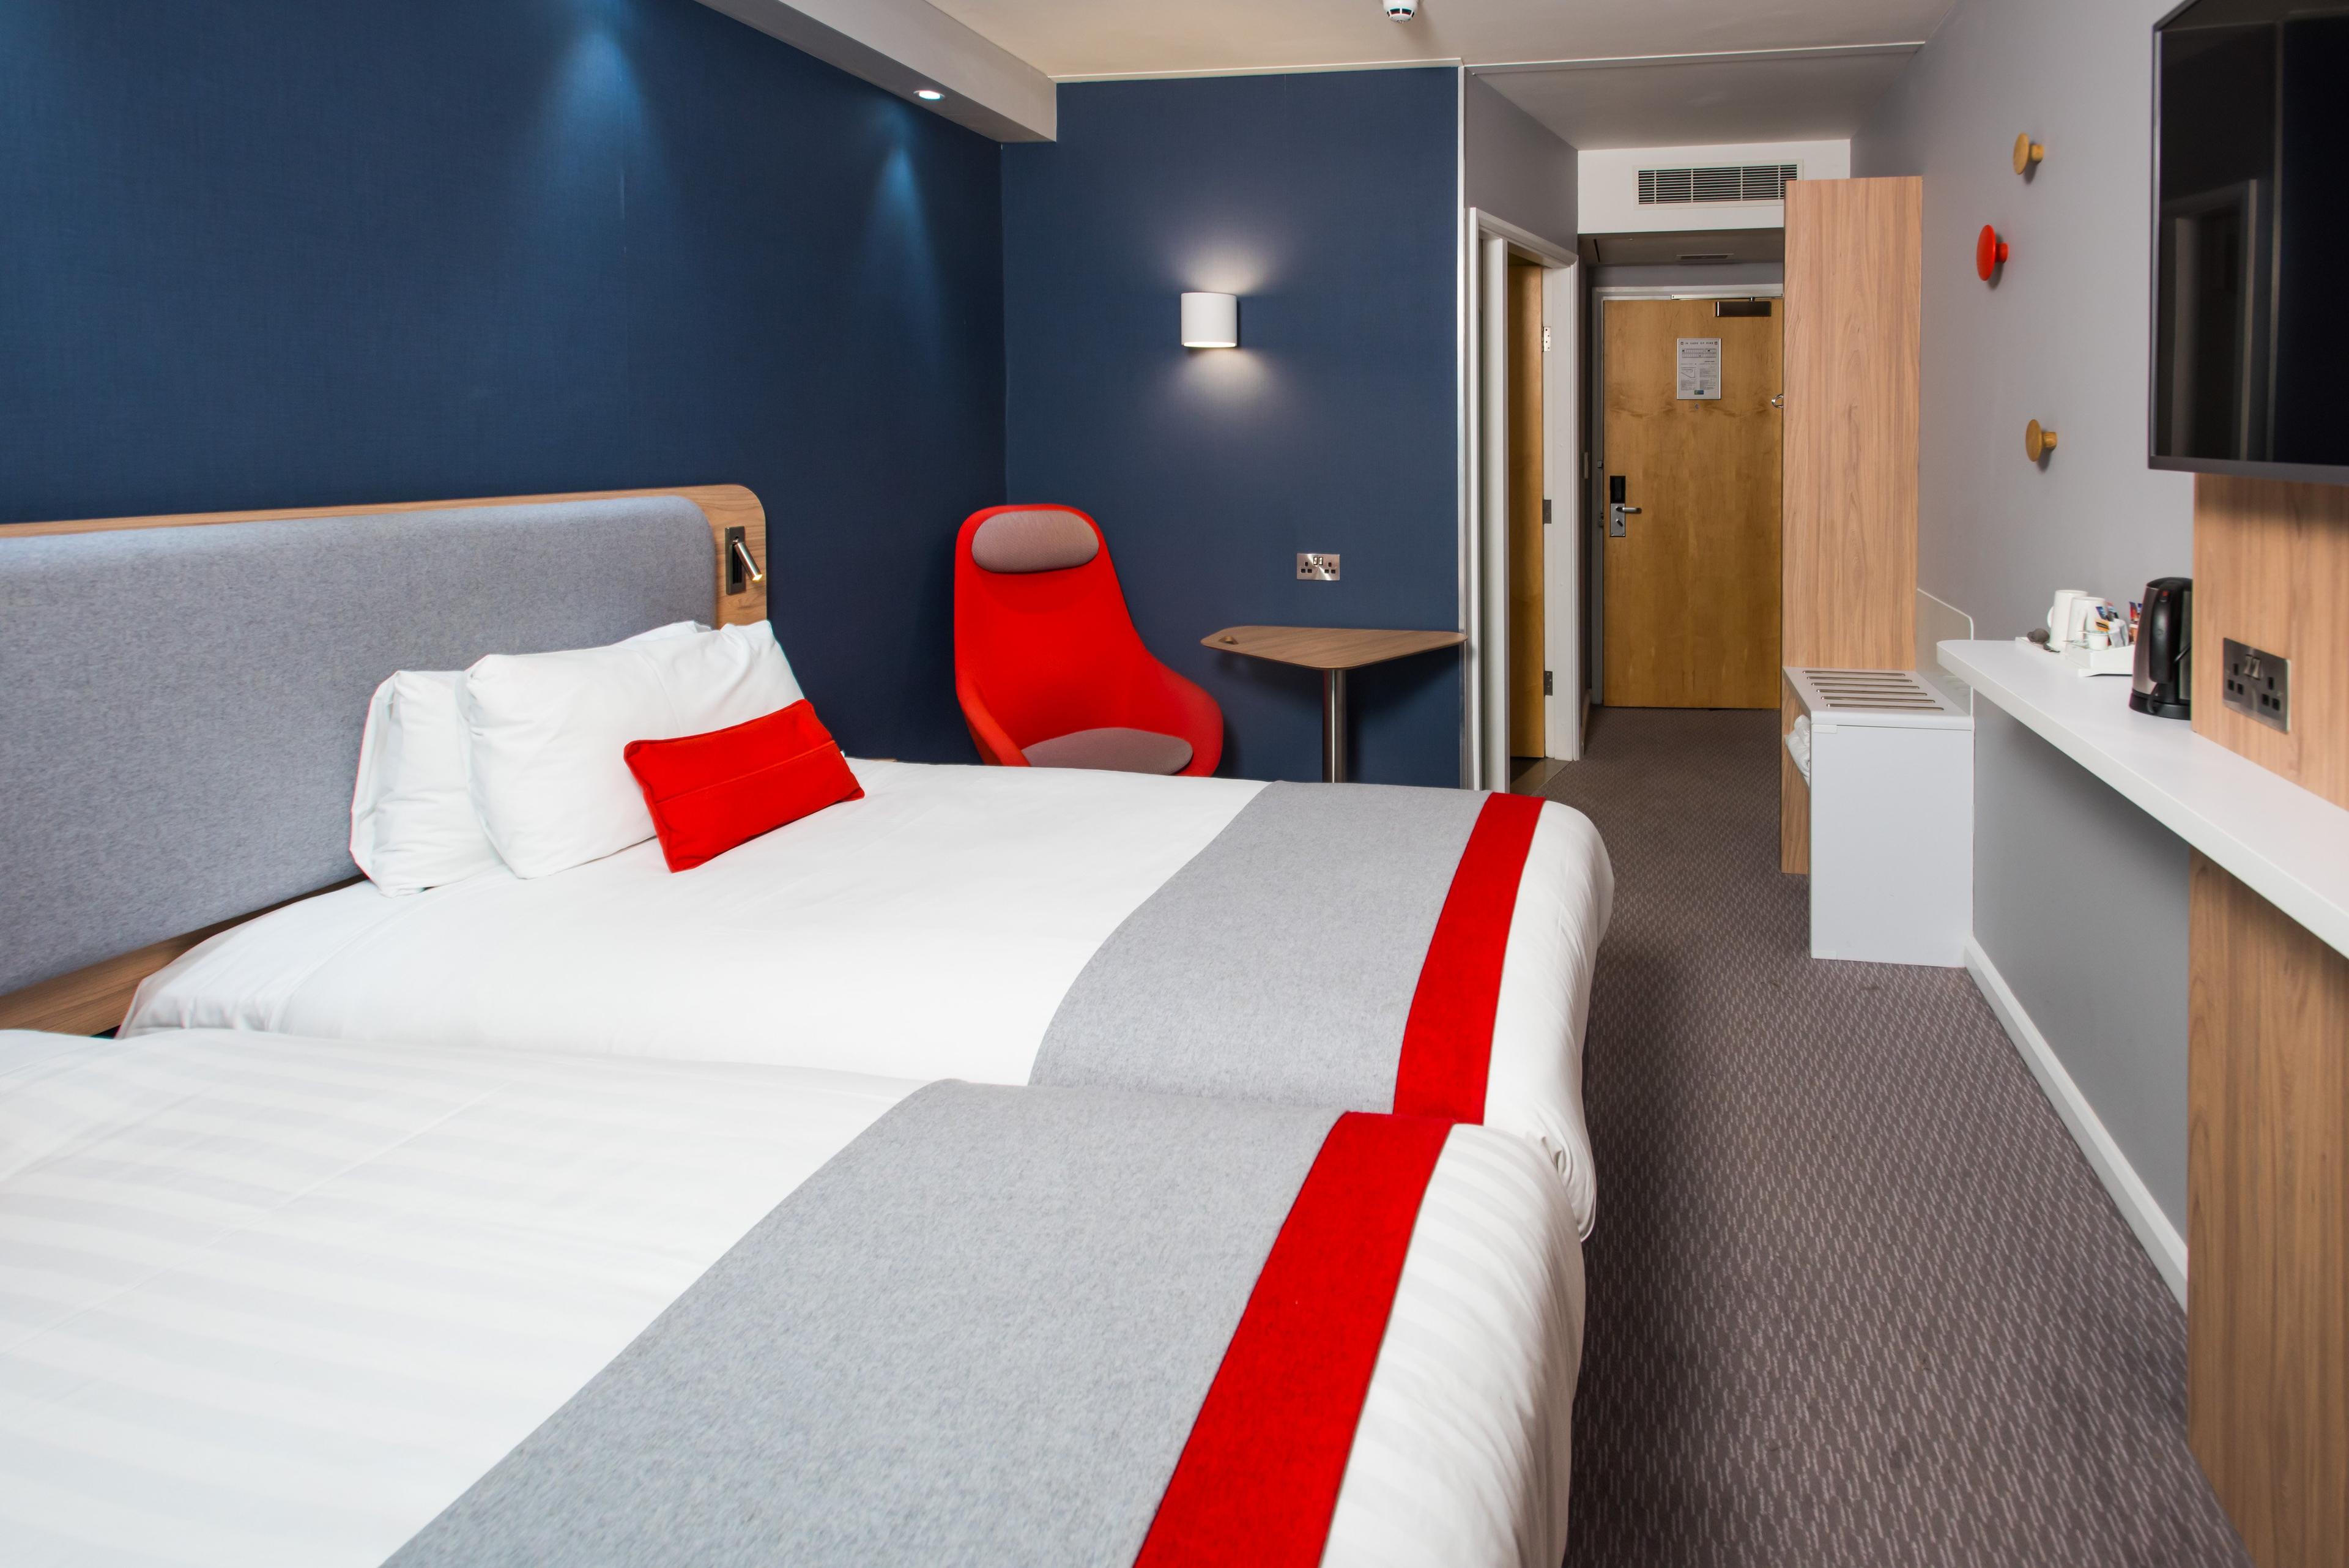 Sleep soundly in Leeds Docks with Holiday Inn Express